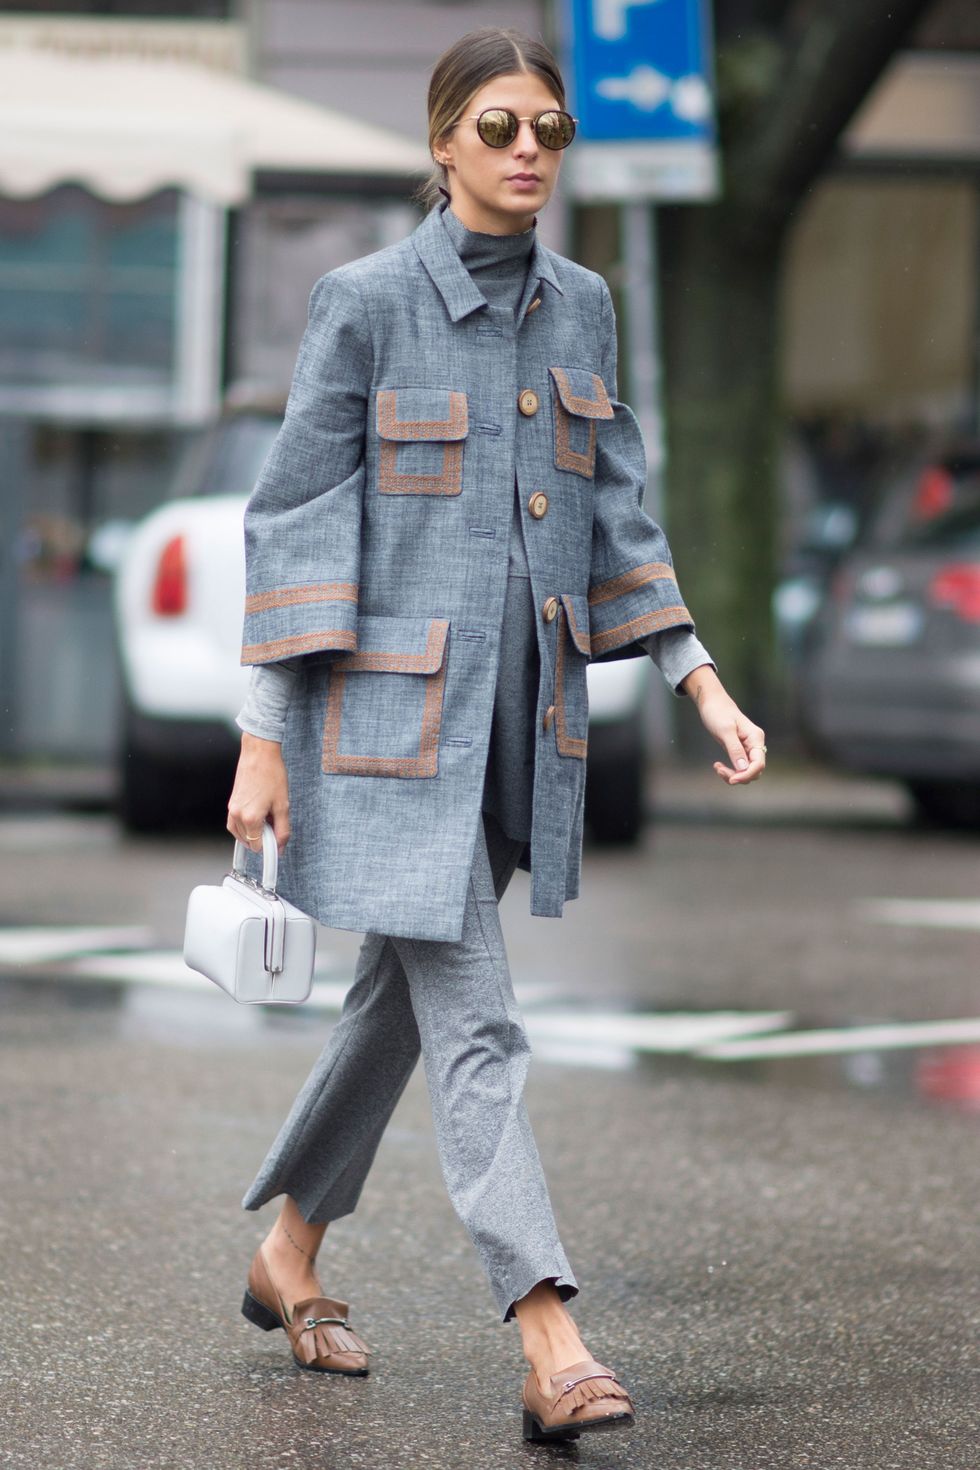 Tonal dressing: what is it and how to wear this style trend